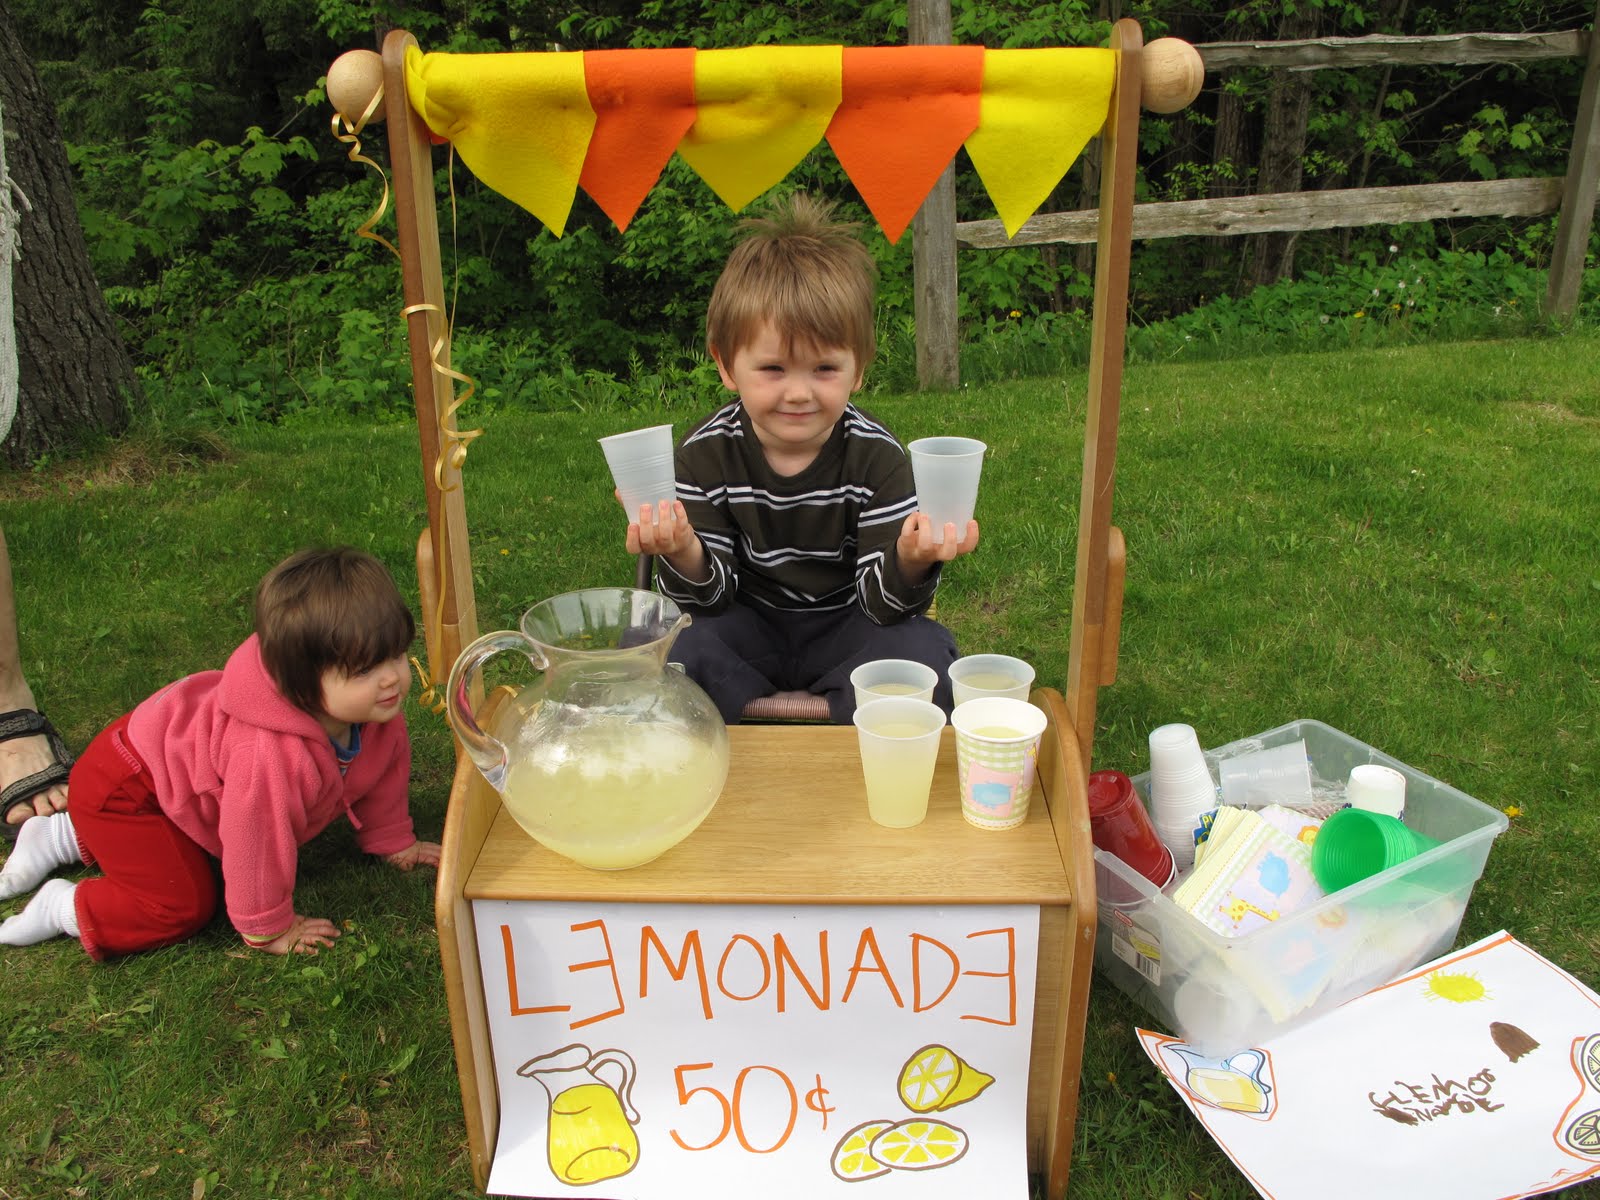 What can I sell at a lemonade stand besides lemonade?